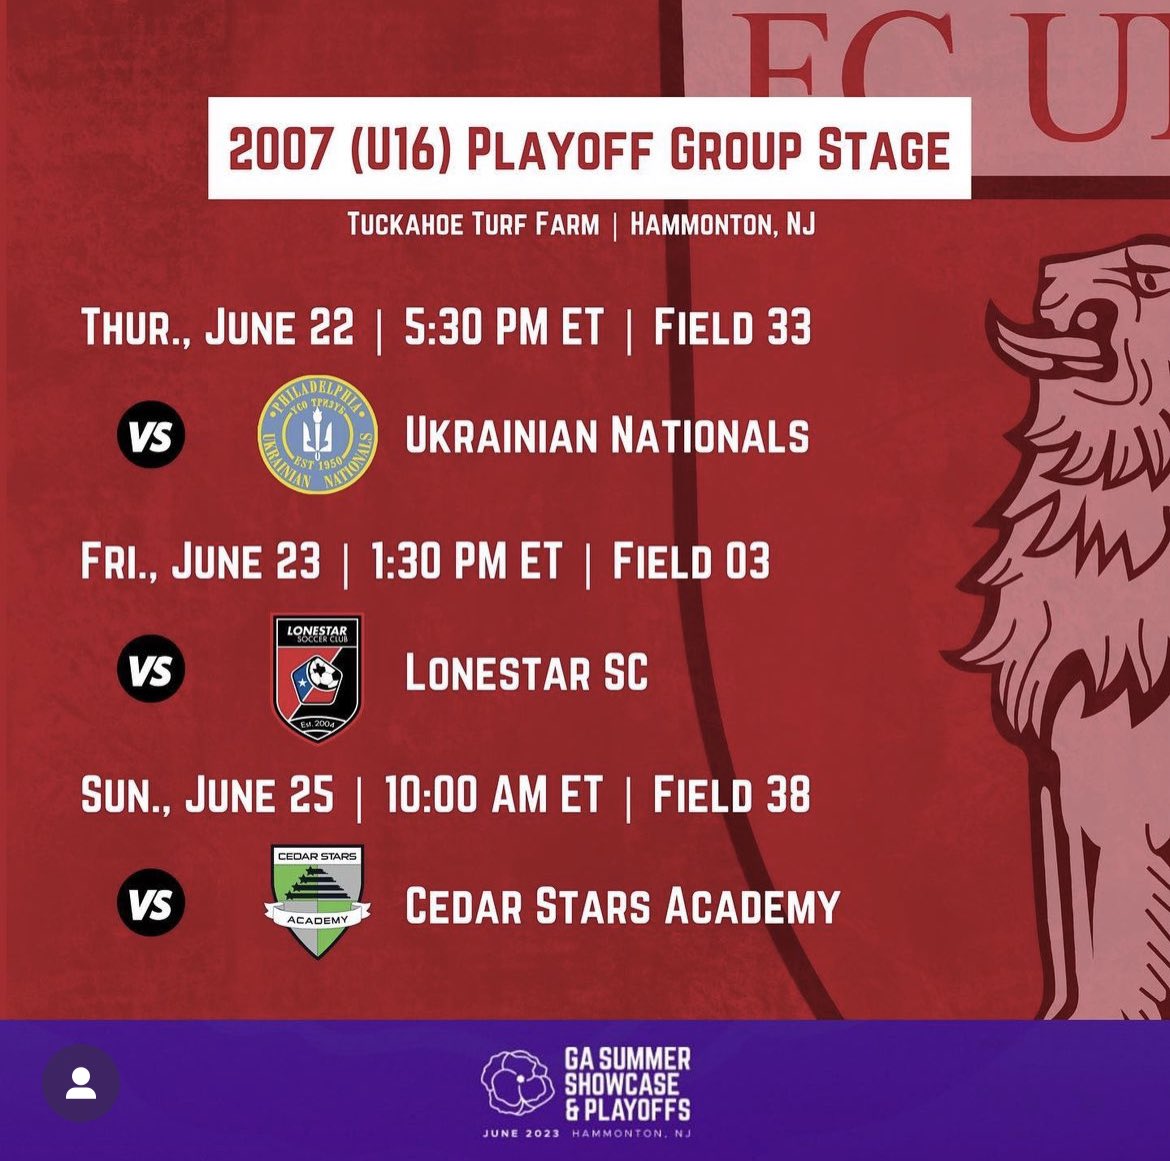 Here’s my schedule for playoffs. Can’t wait to play tomorrow! @FCU2007GA